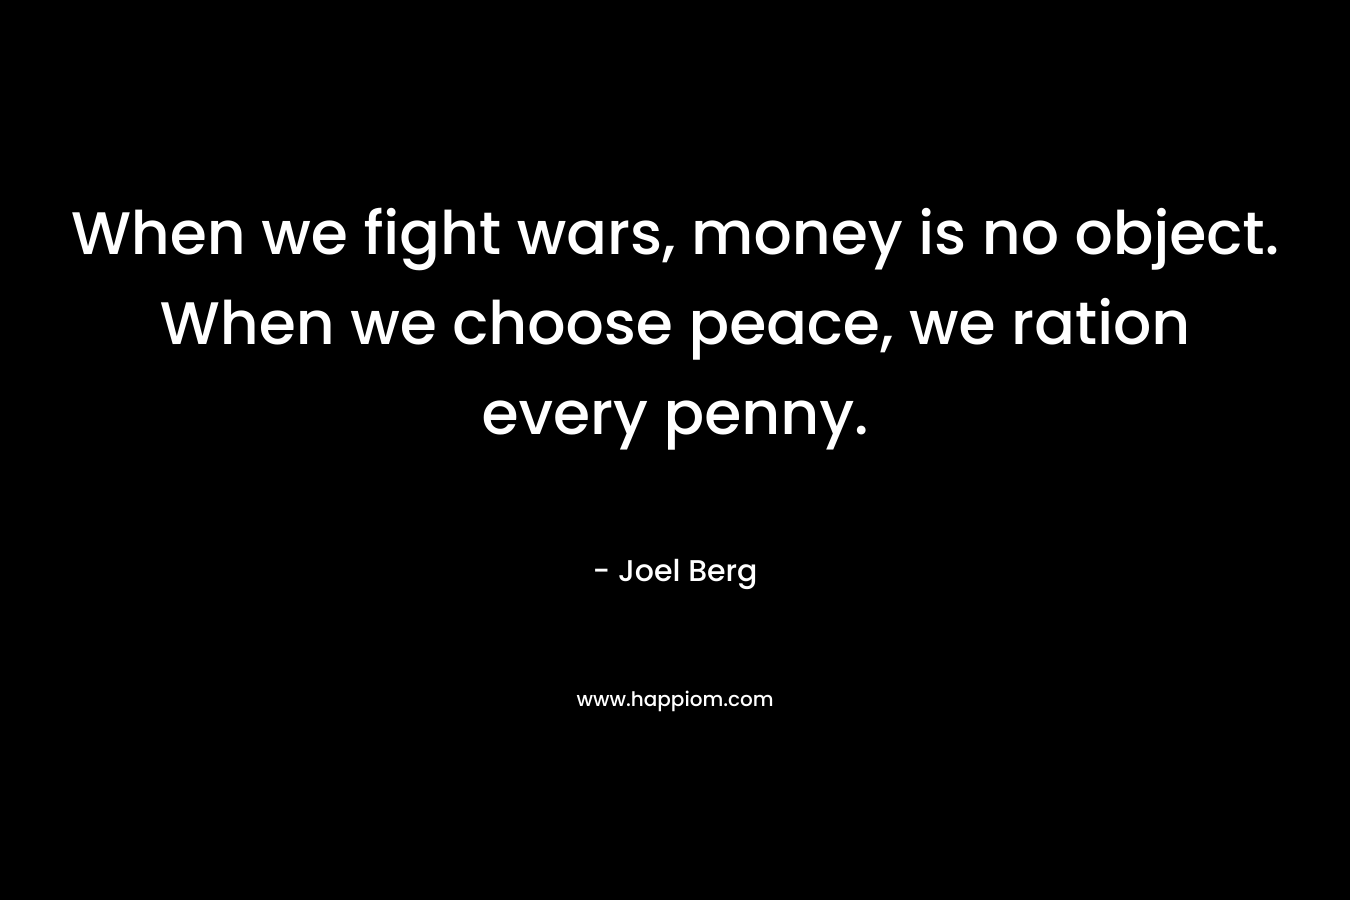 When we fight wars, money is no object. When we choose peace, we ration every penny. – Joel Berg